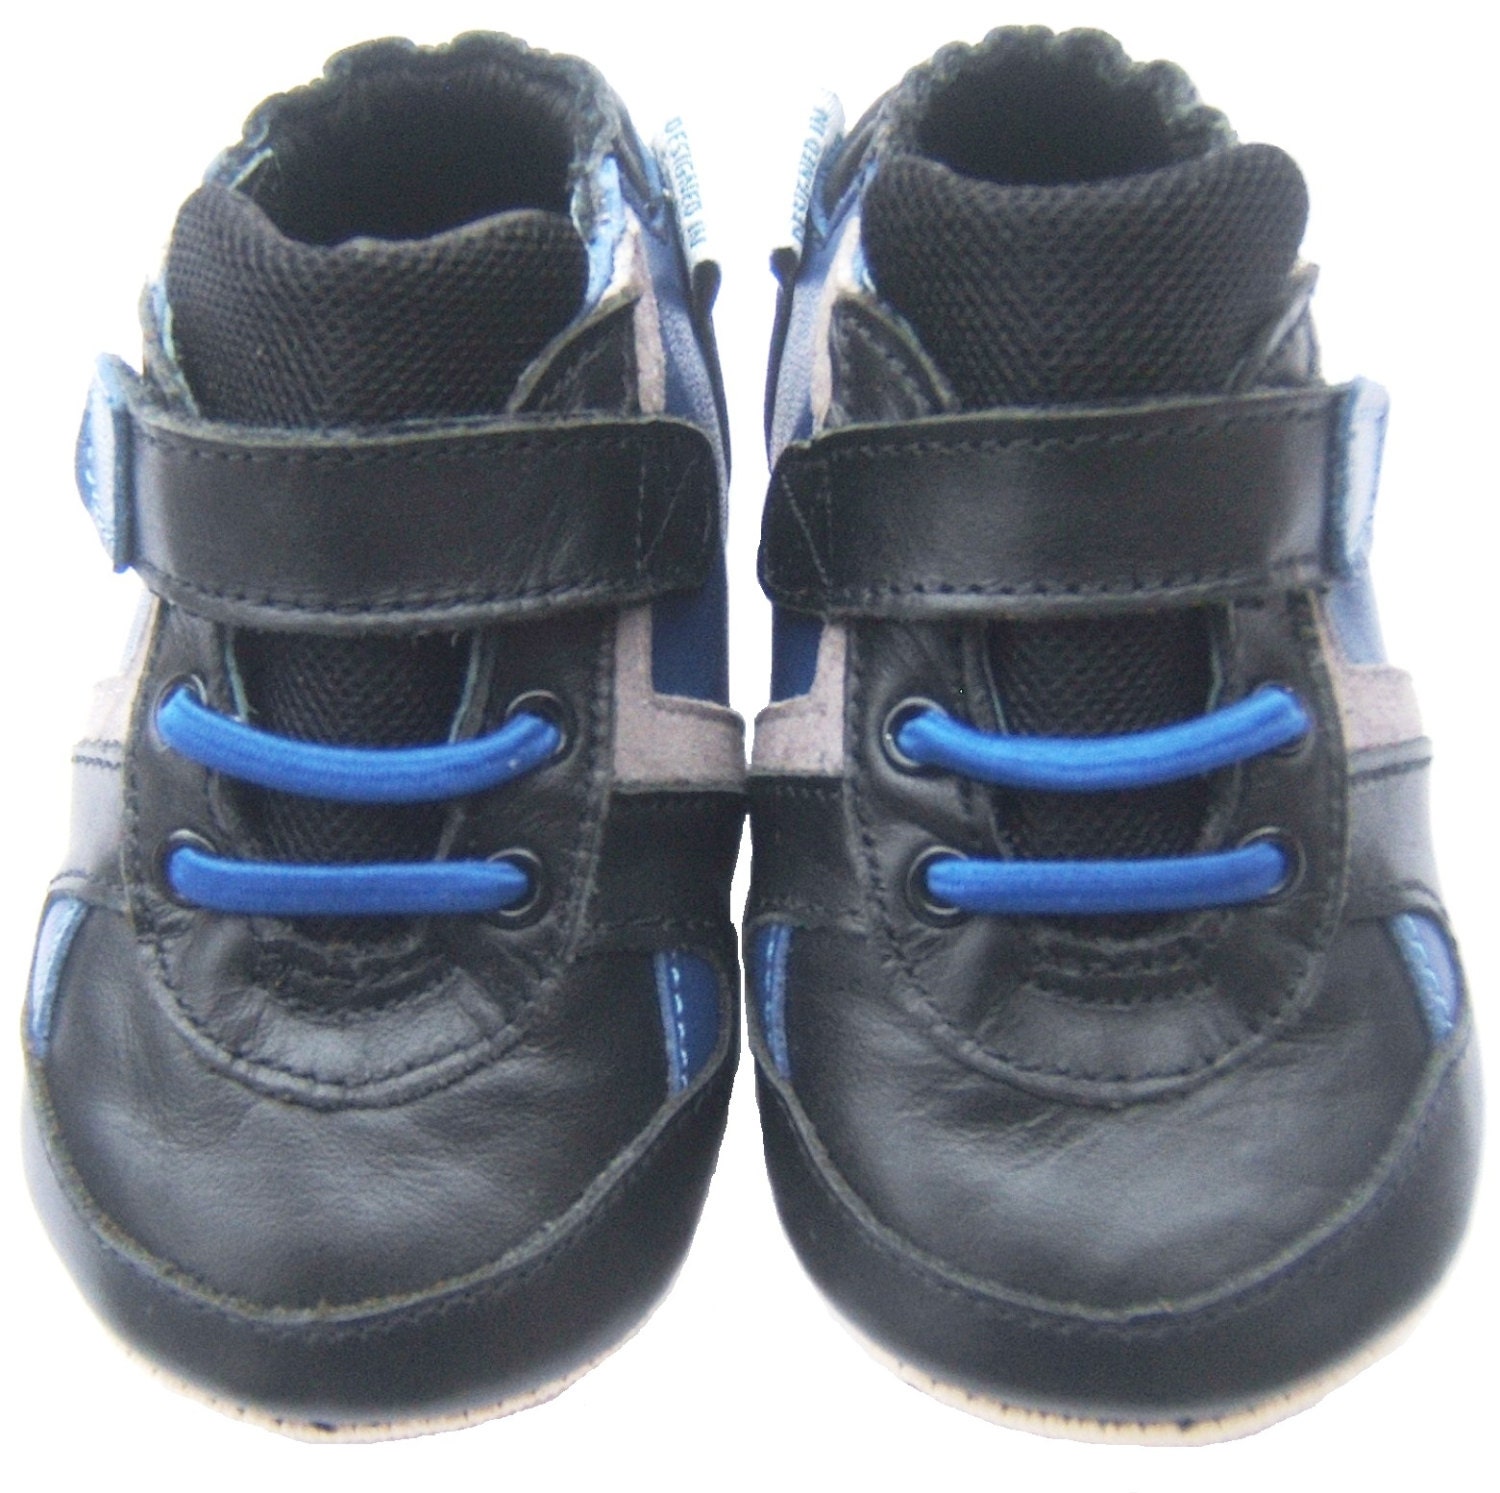 Free shipping Jinwood Thin Rubber Sole Leather Baby Shoes